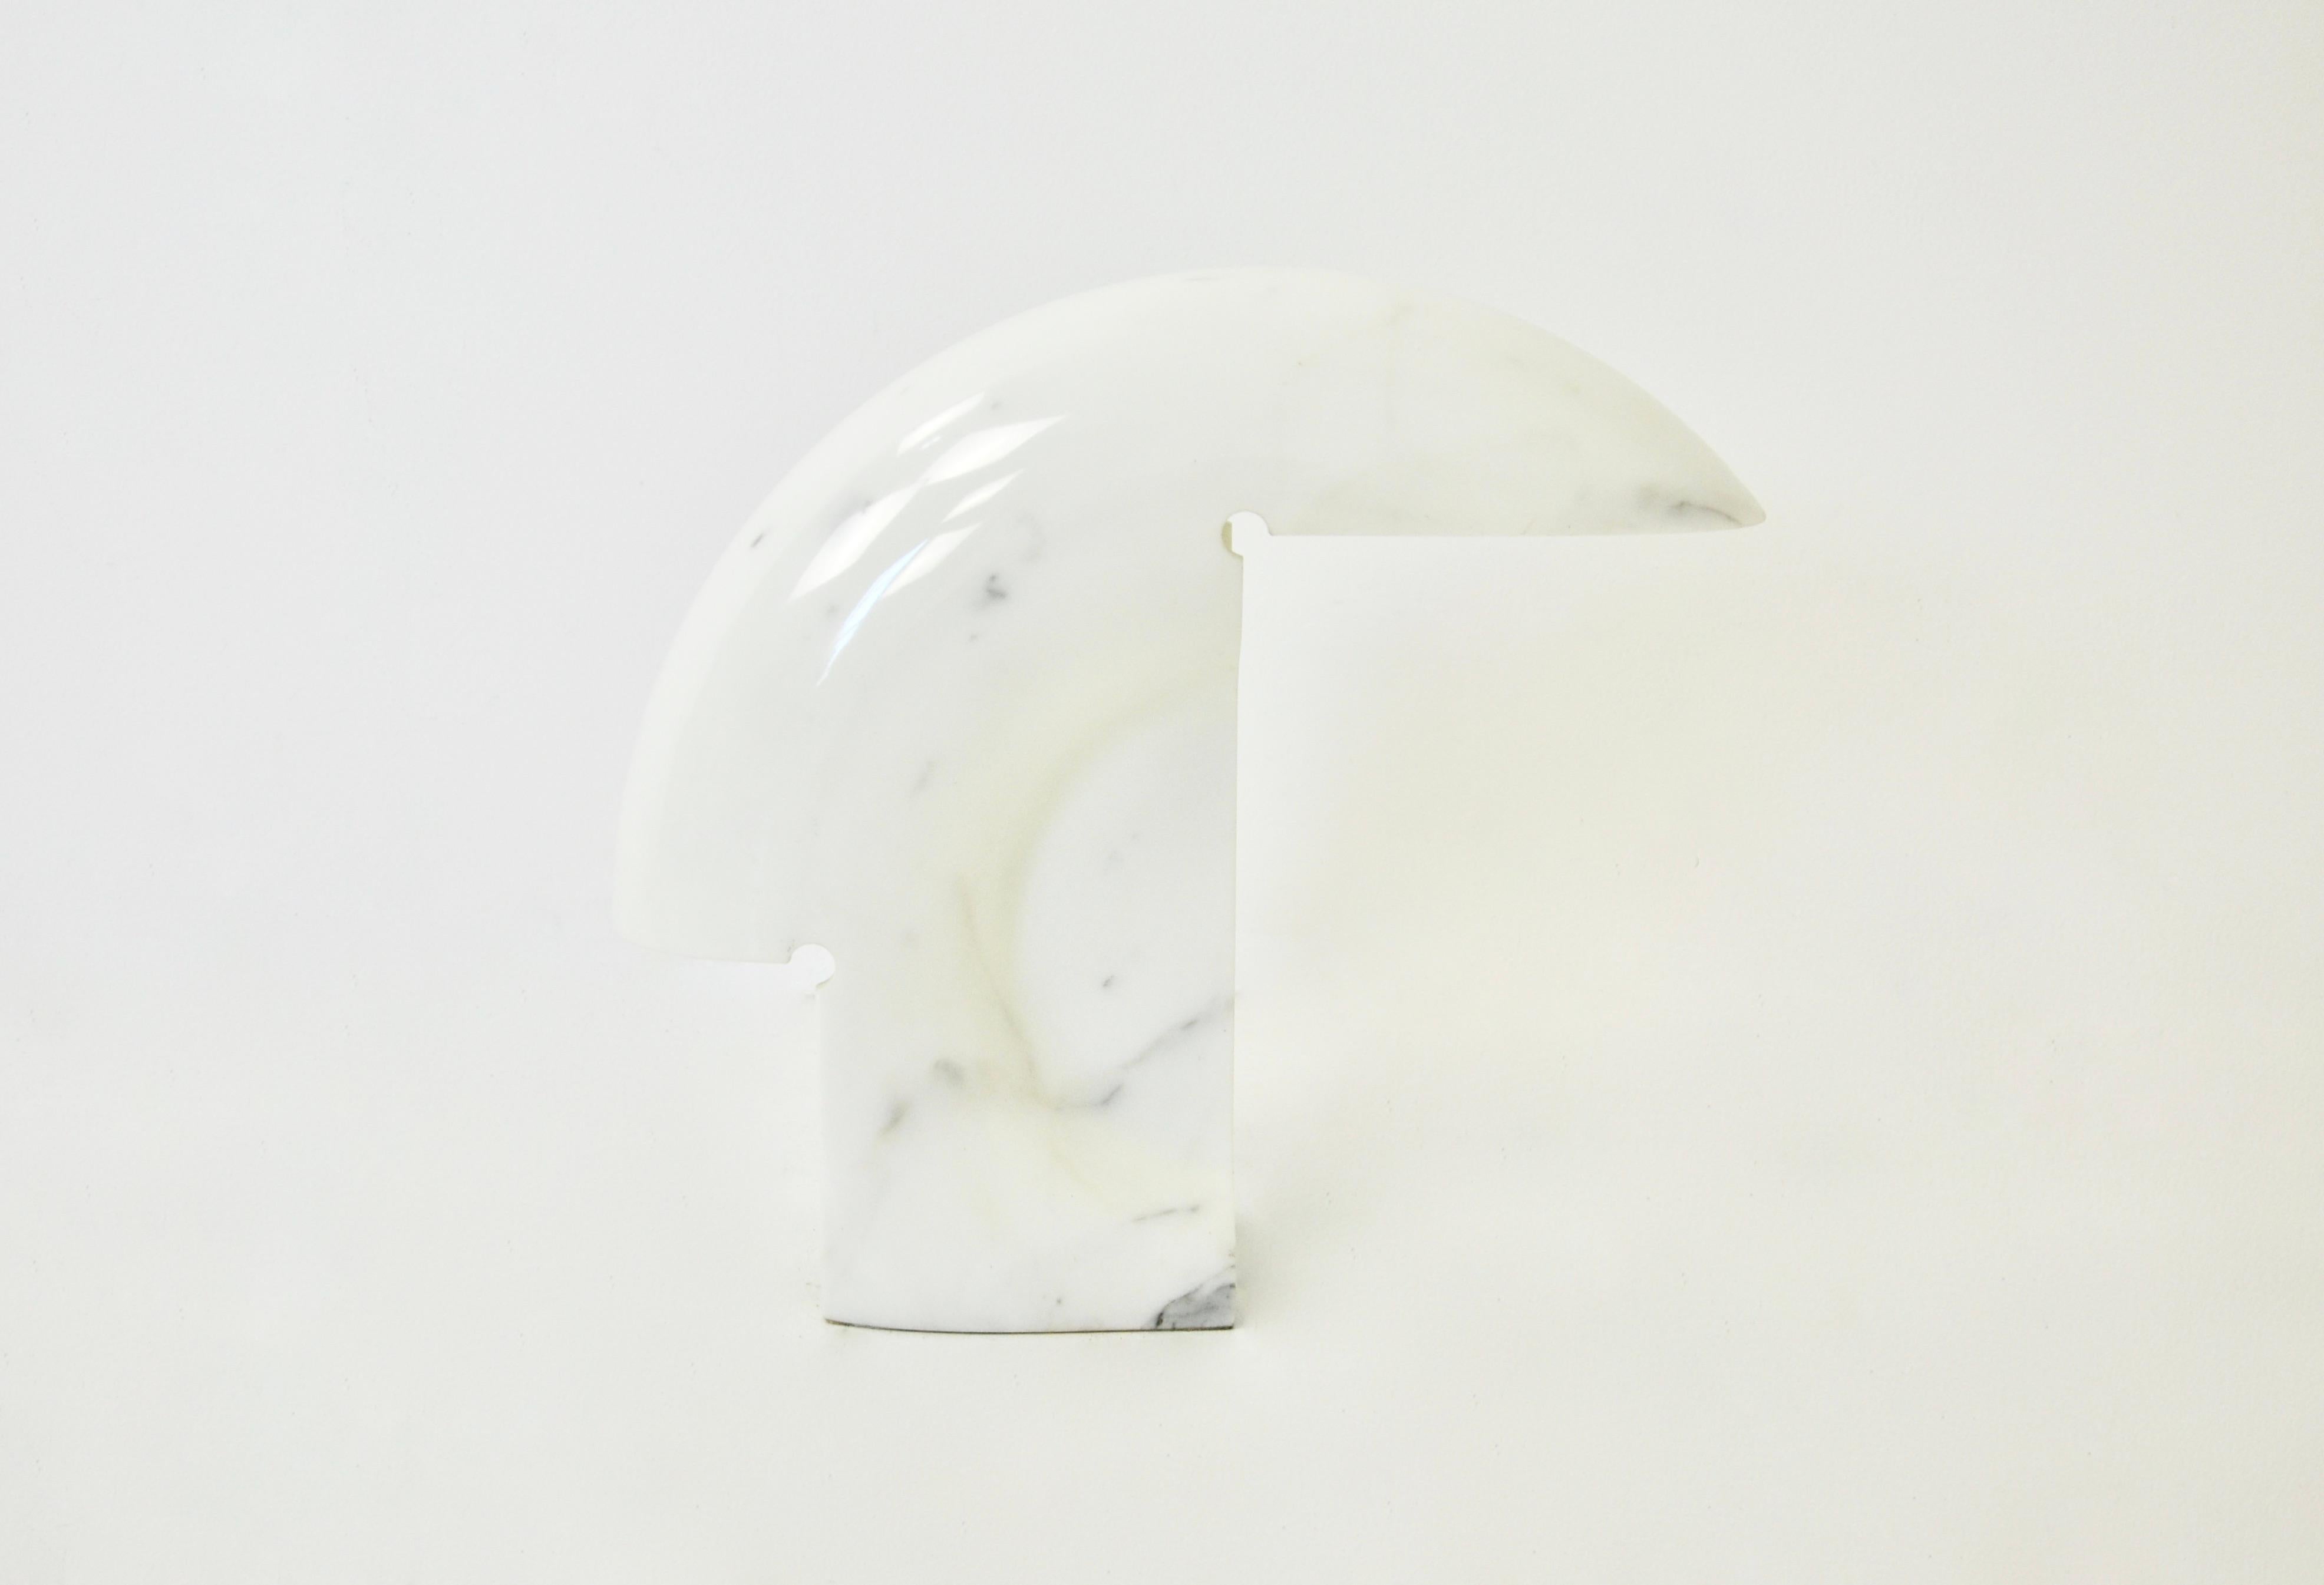 lamp completely in marble. Stamped flos on the inside. Wear due to time and age of the lamp.